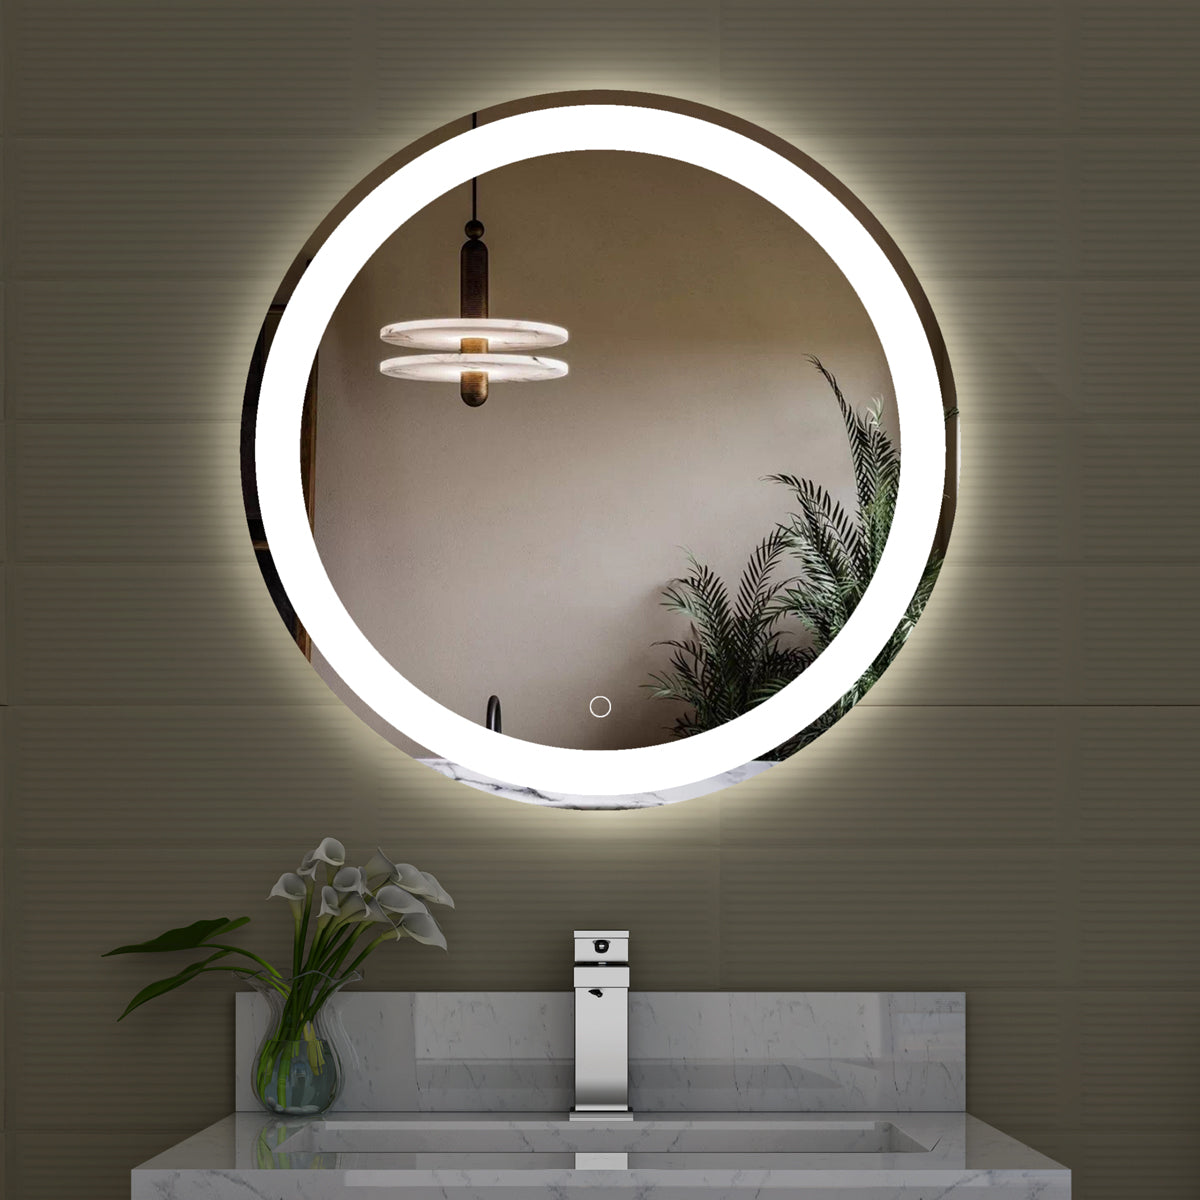 Sinber Wall Mounted Round Makeup LED Bathroom Vanity Mirror with Lights Backlit and Anti-Fog (Style 4)